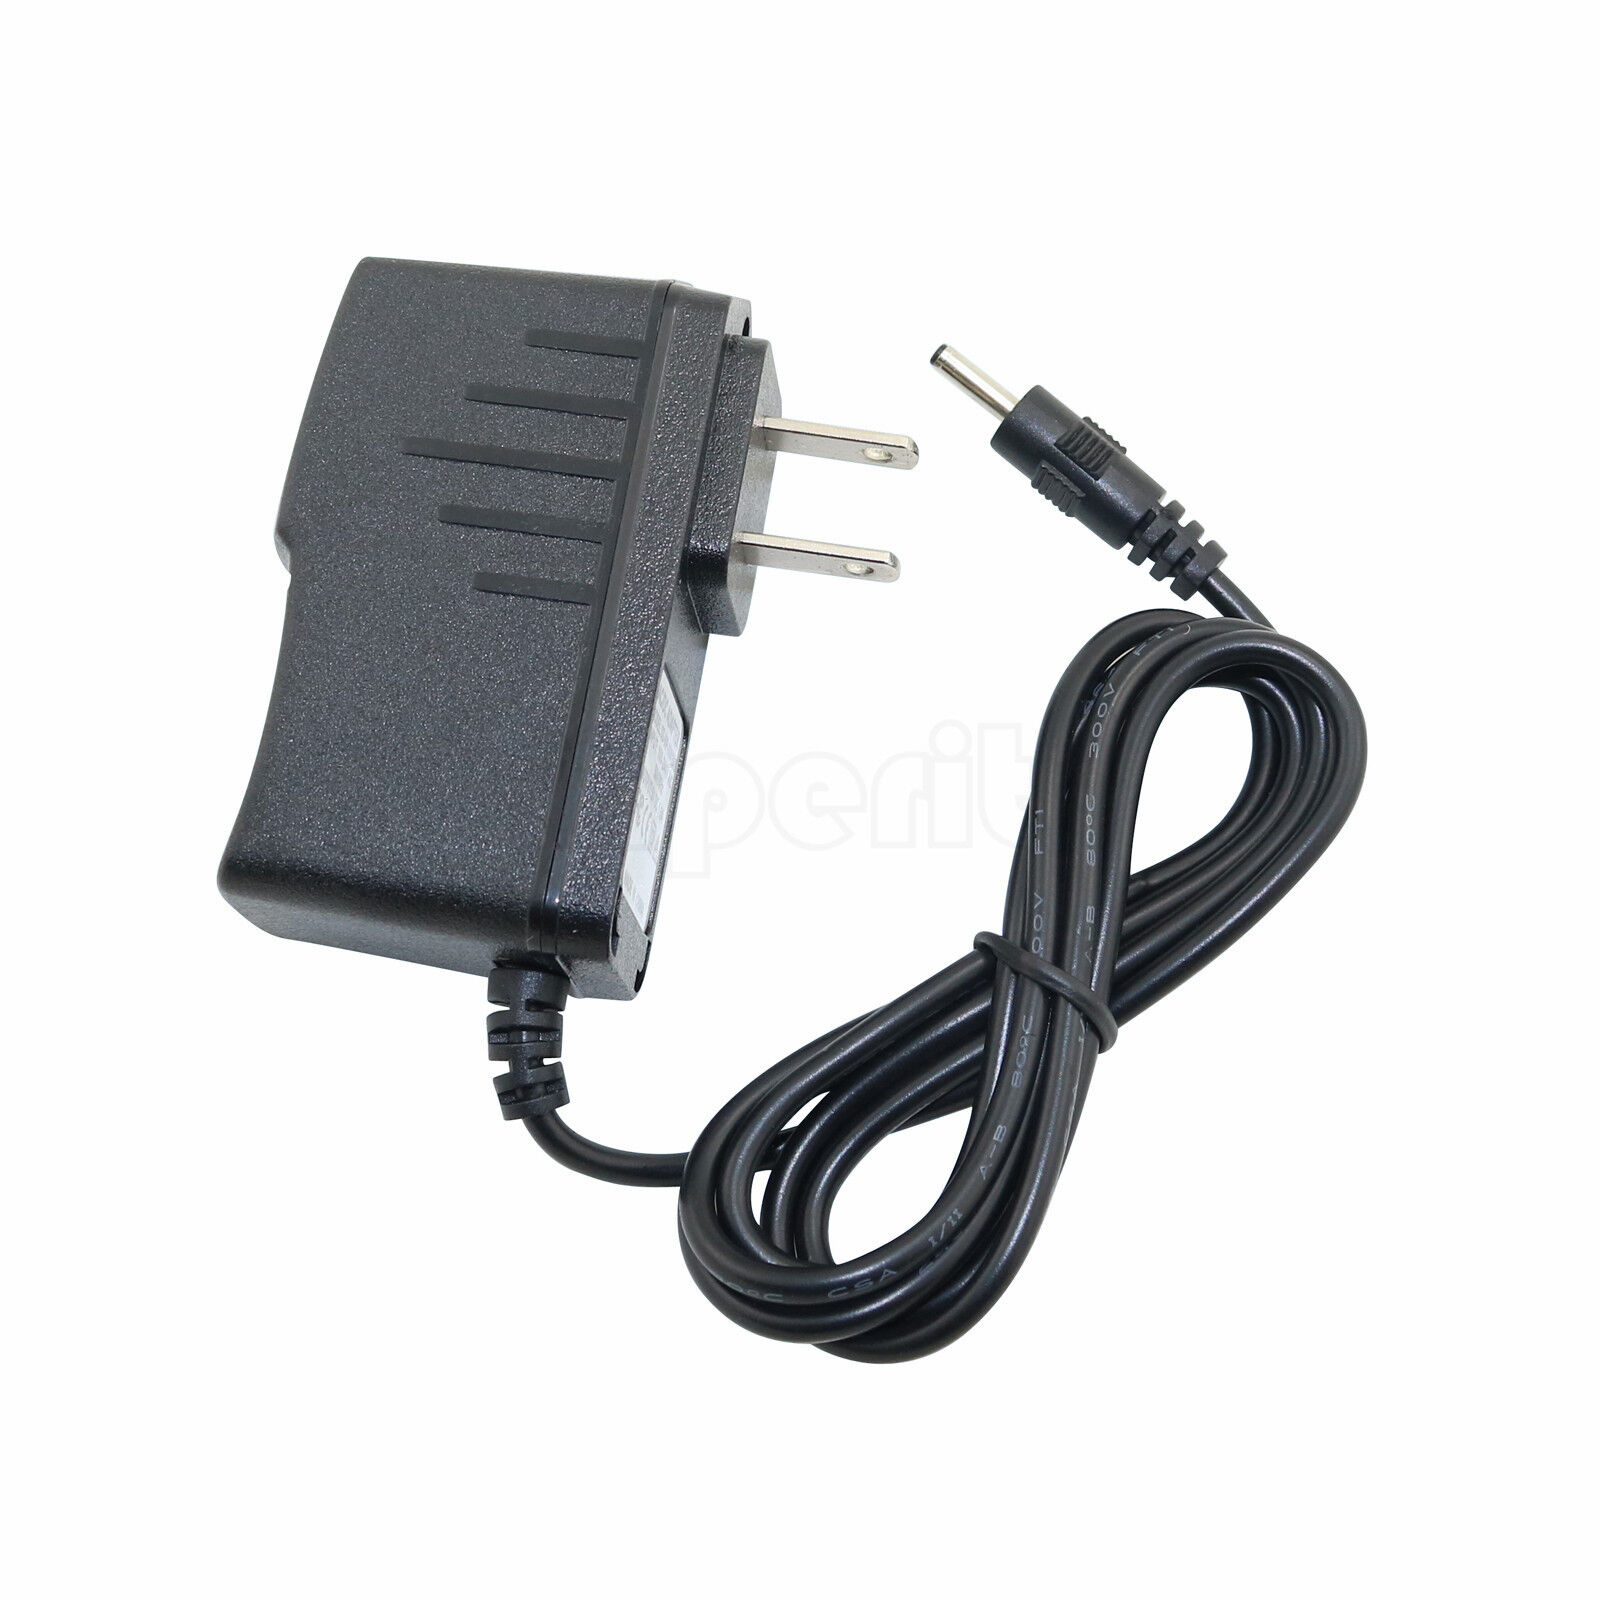 AC Adapter For Akai MPC Live I II Music Production Center Charger Power Supply Brand Unbranded Bundled Items Power Cab